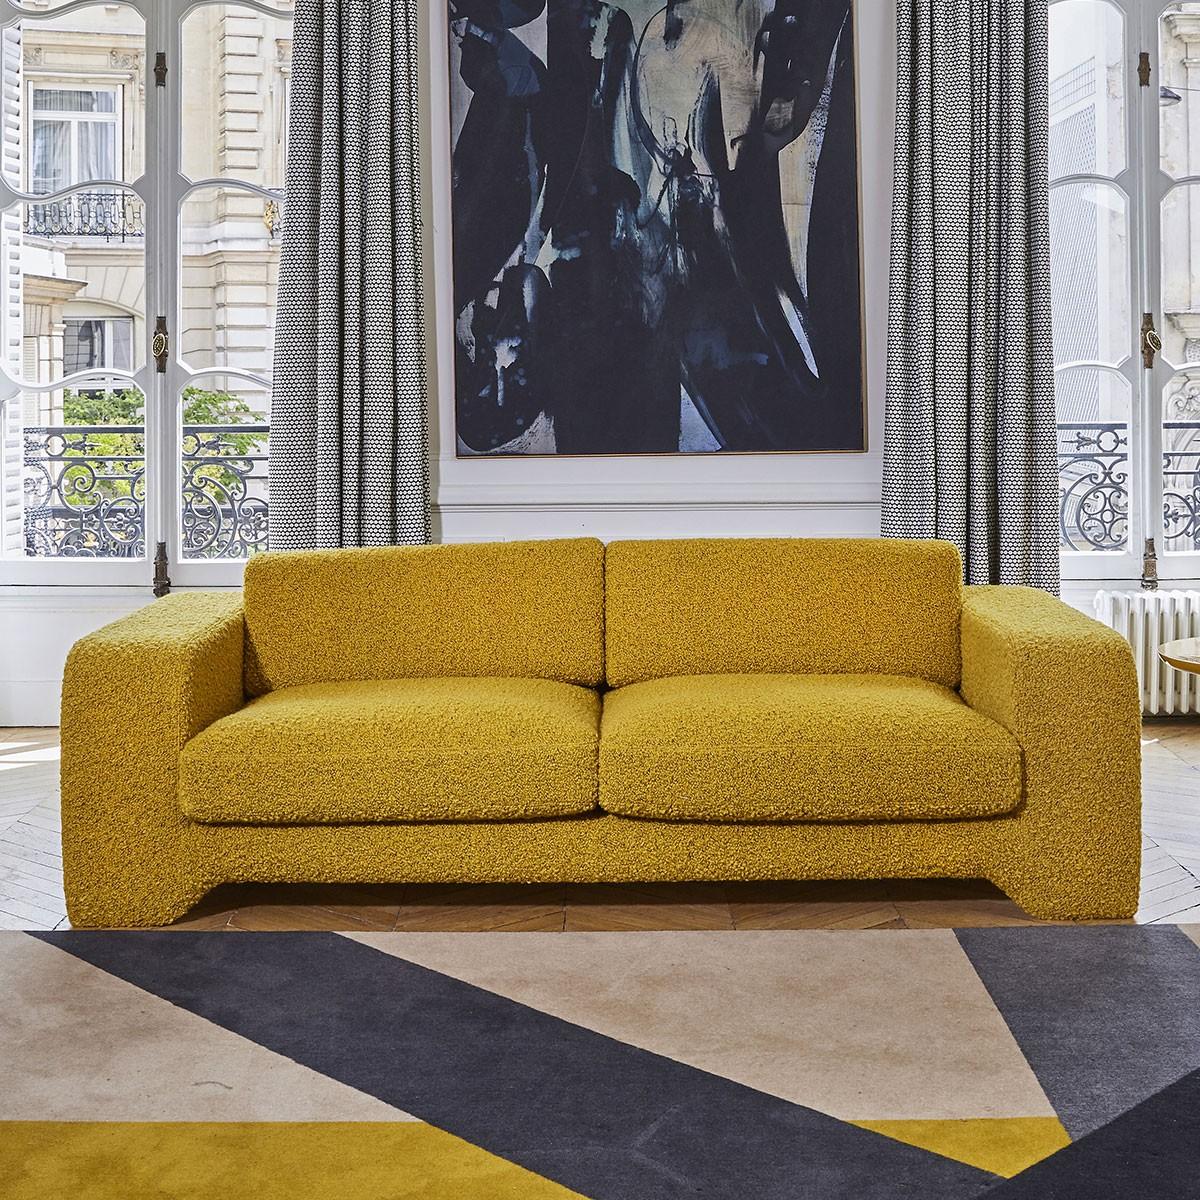 Popus Editions Giovanna 4 seater sofa in Blue Verone Velvet Upholstery

Giovanna is a sofa with a strong profile. A sober, plush line, with this famous detail that changes everything, so as not to forget its strength of character and this charming